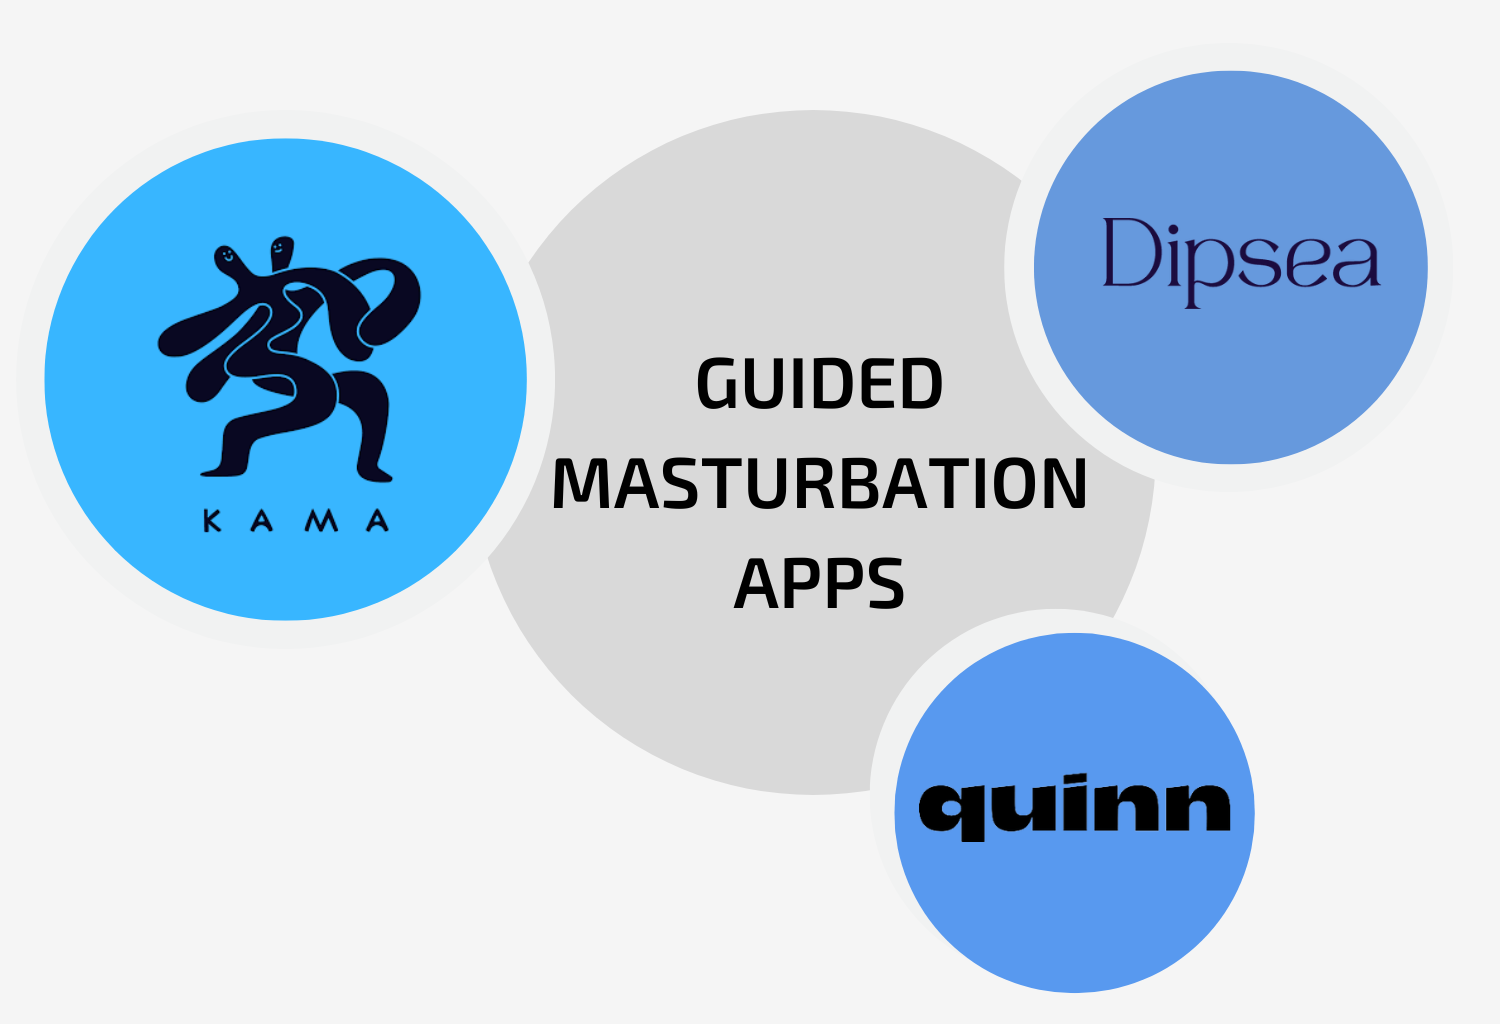 Diagram of the Guided Masturbation Apps